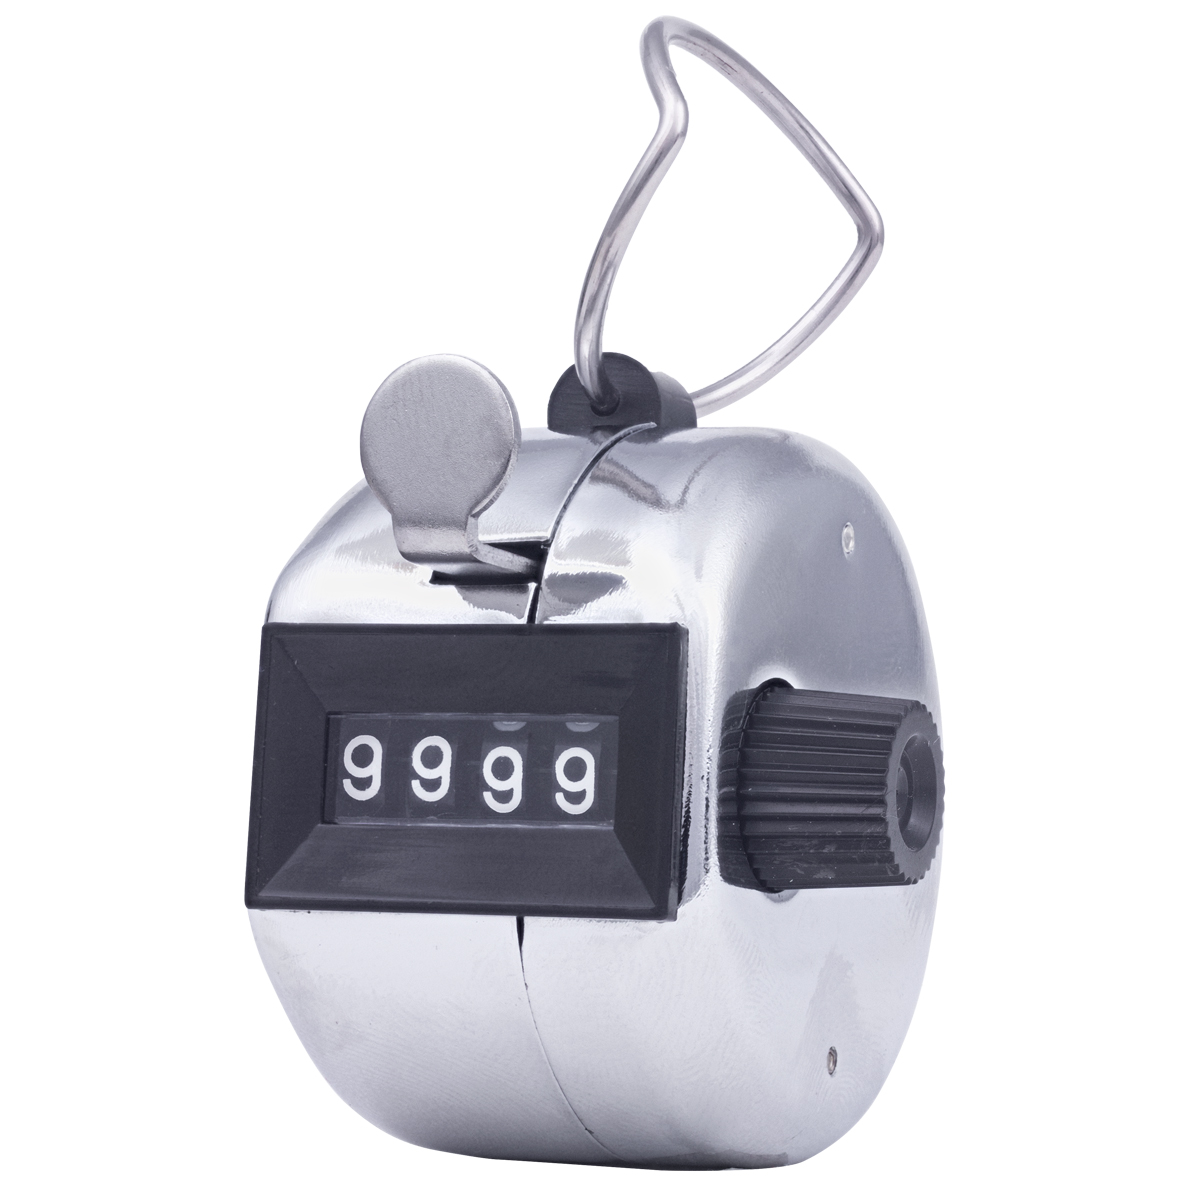 3129 Digital Counter with Key-Chain/Wrist Strap